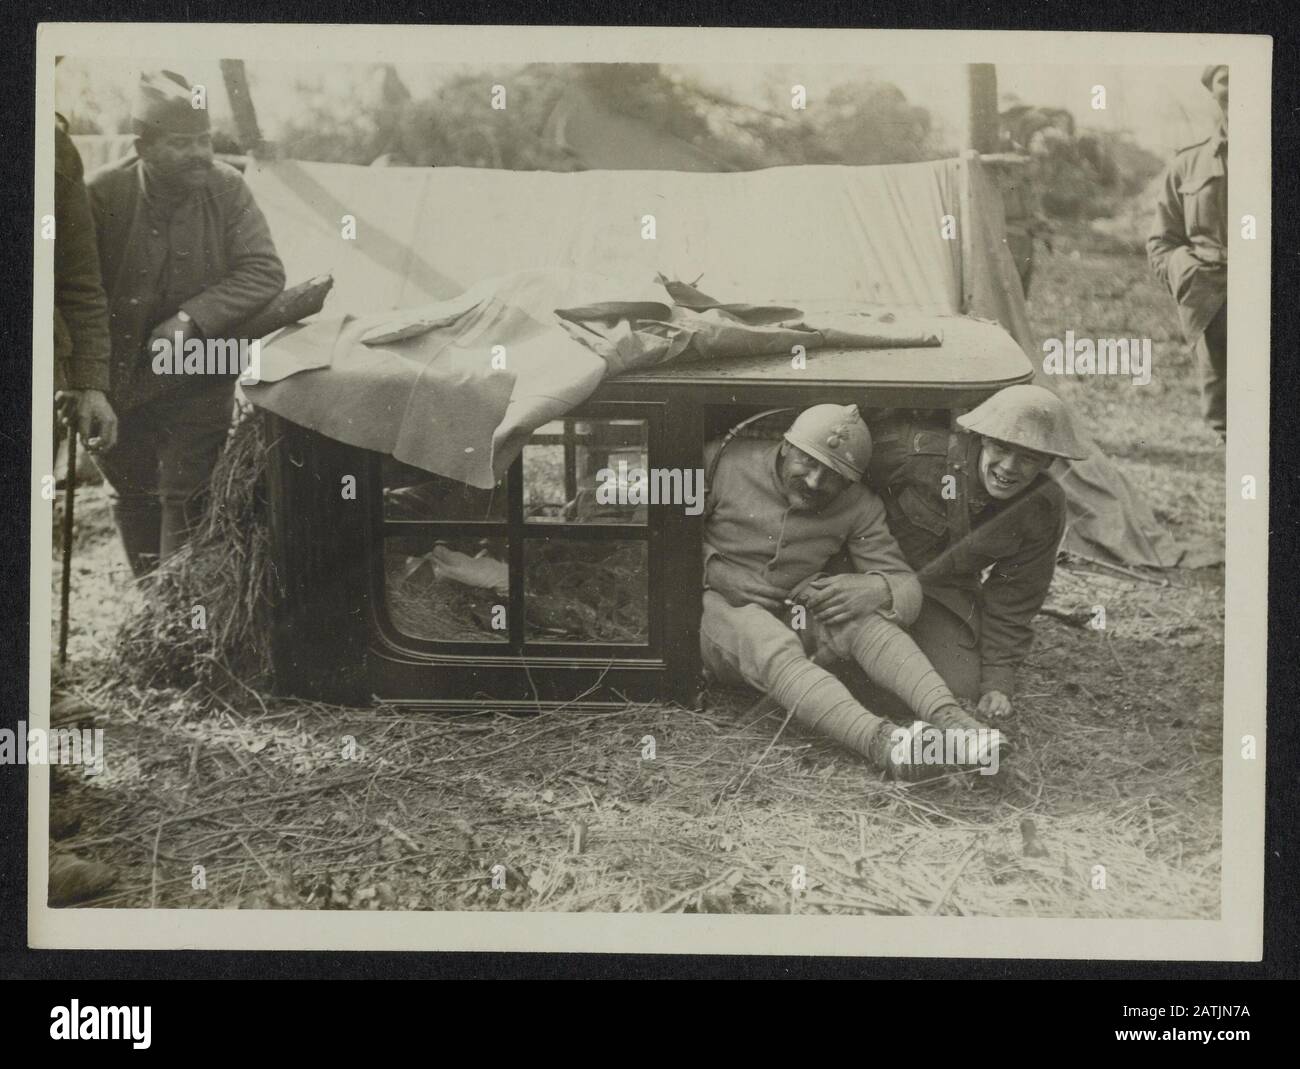 The British Western Front in France Description: The German offensive. A British and French soldier bivouaced under the top of a motor car in a French wood Annotation: British Western Front in France. The German offensive. British and French soldiers camped under the cab of a truck Date: {1914-1918} Location: France Keywords: woods, First World War, fronts, soldiers, trucks Stock Photo